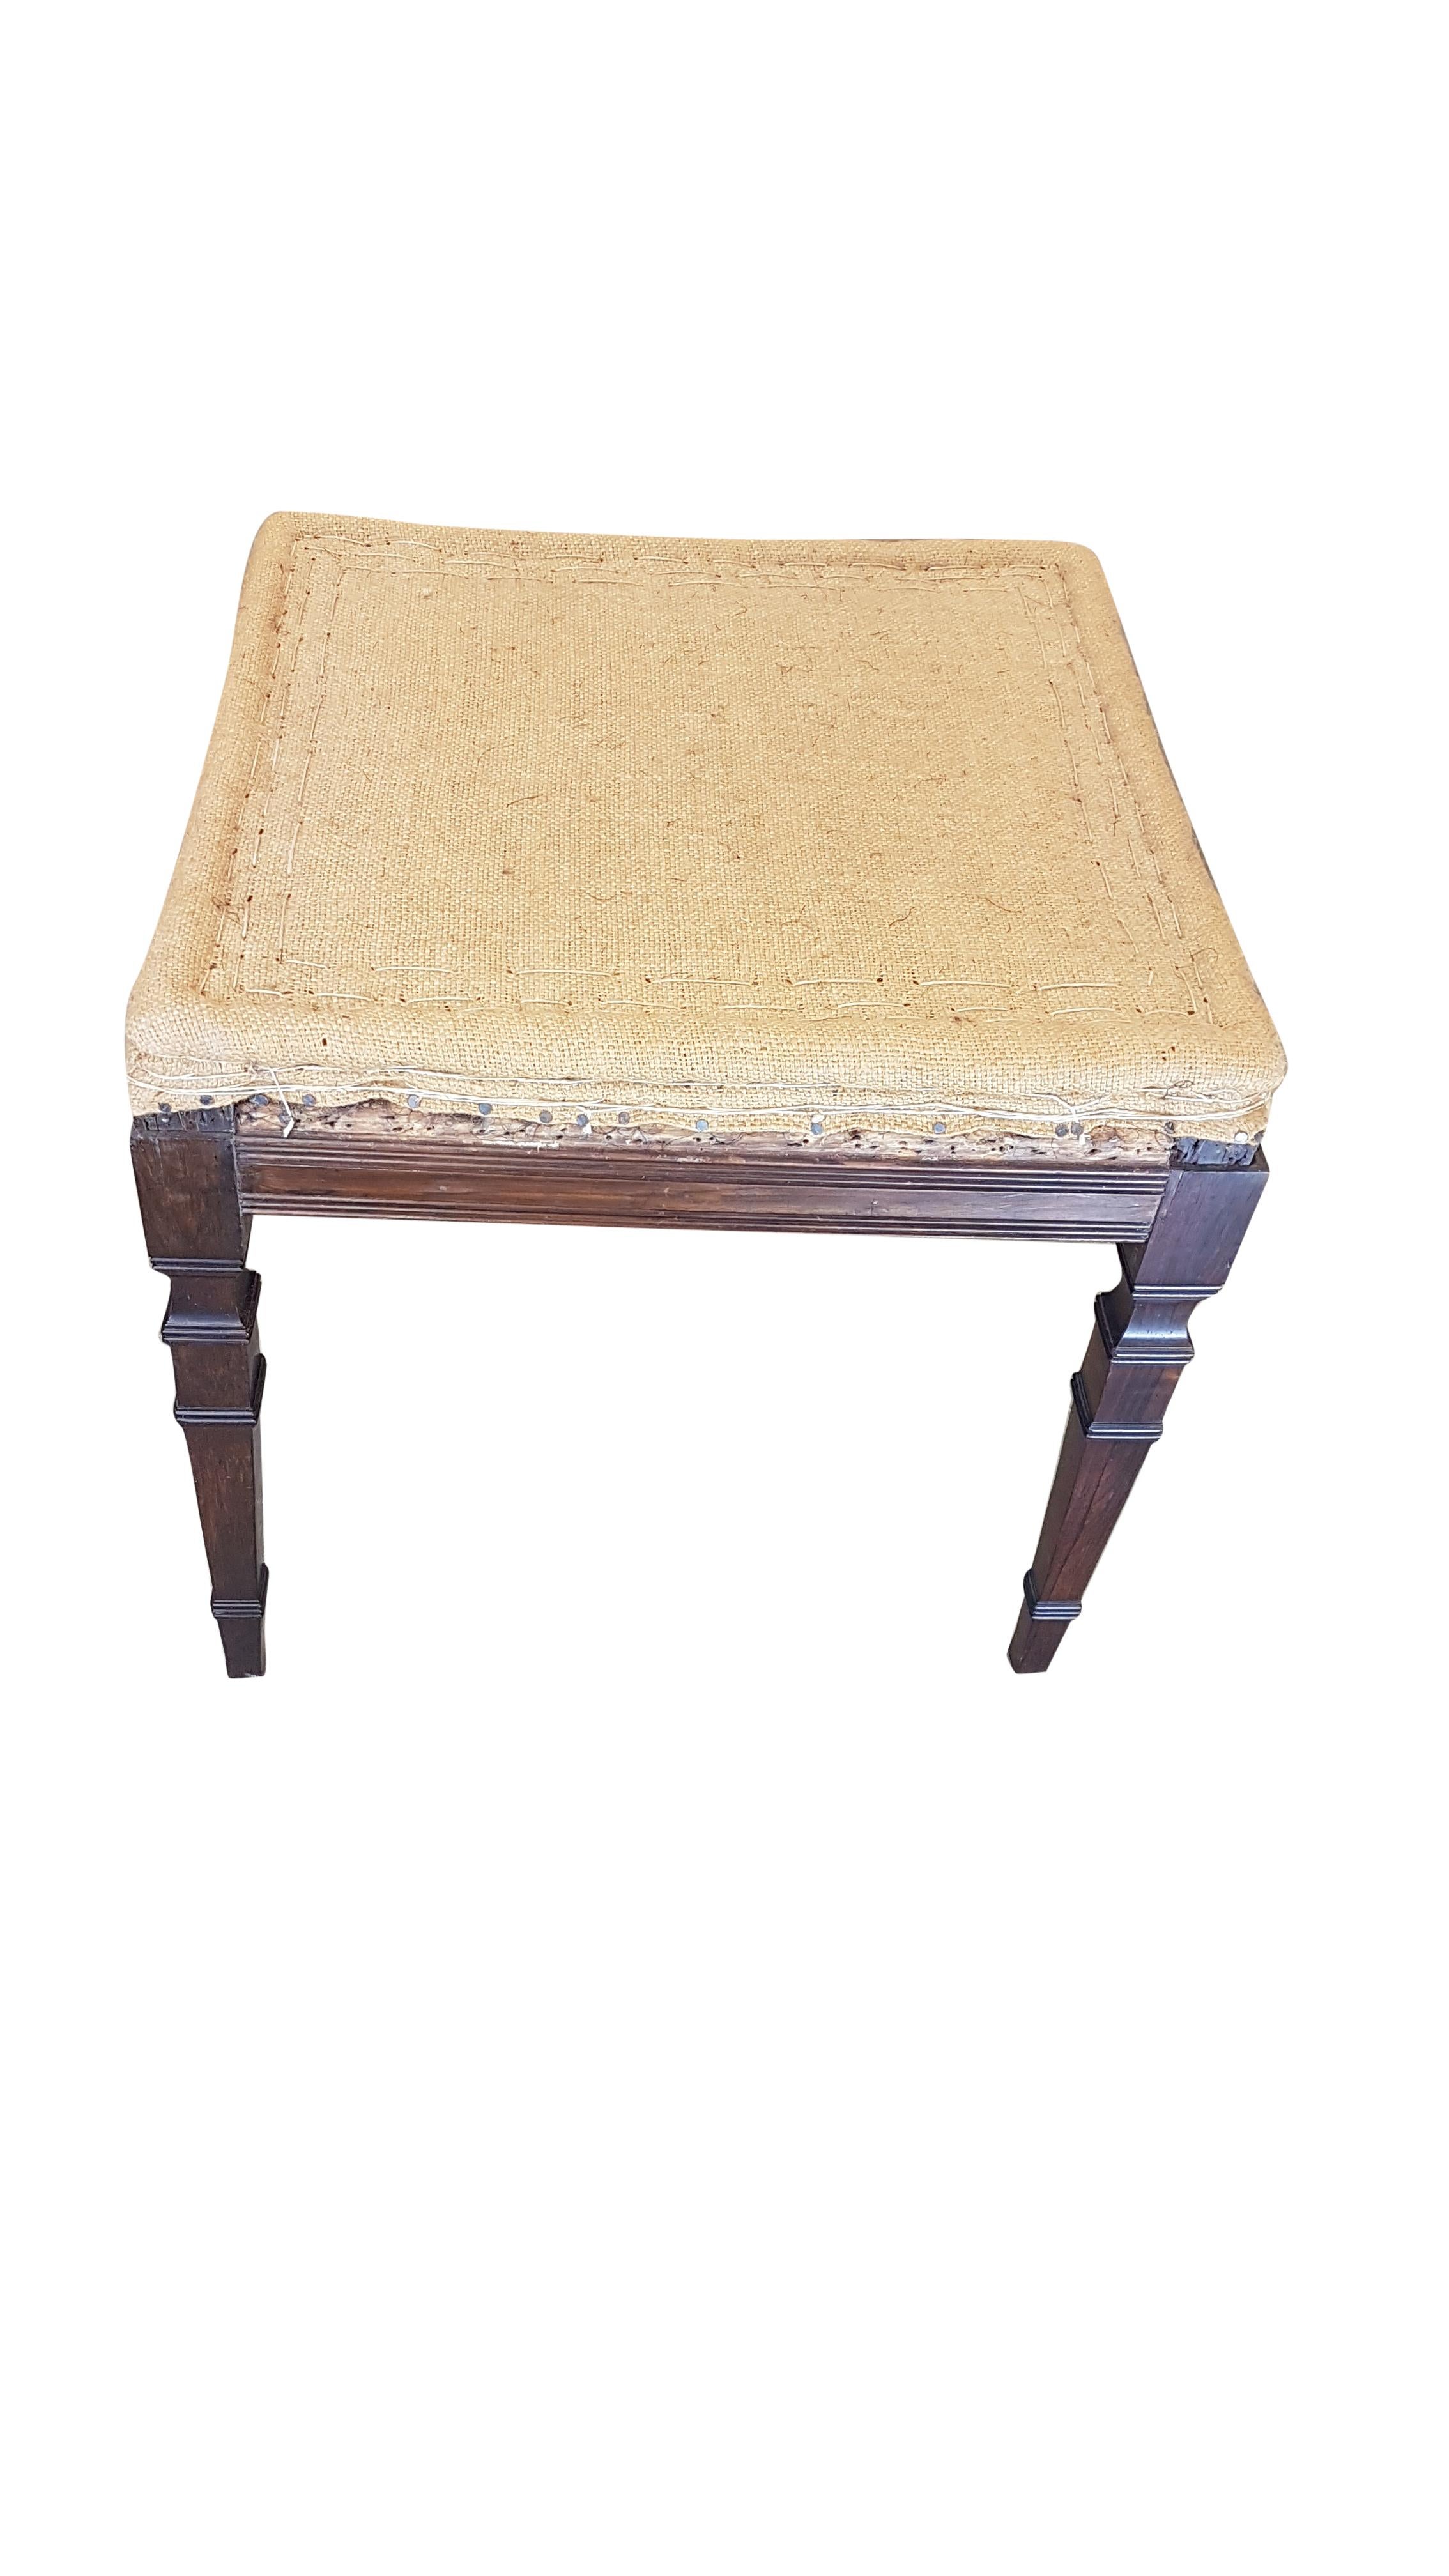 Carved Late 19th Century Rosewood Stool by John Reid & Sons of Leeds